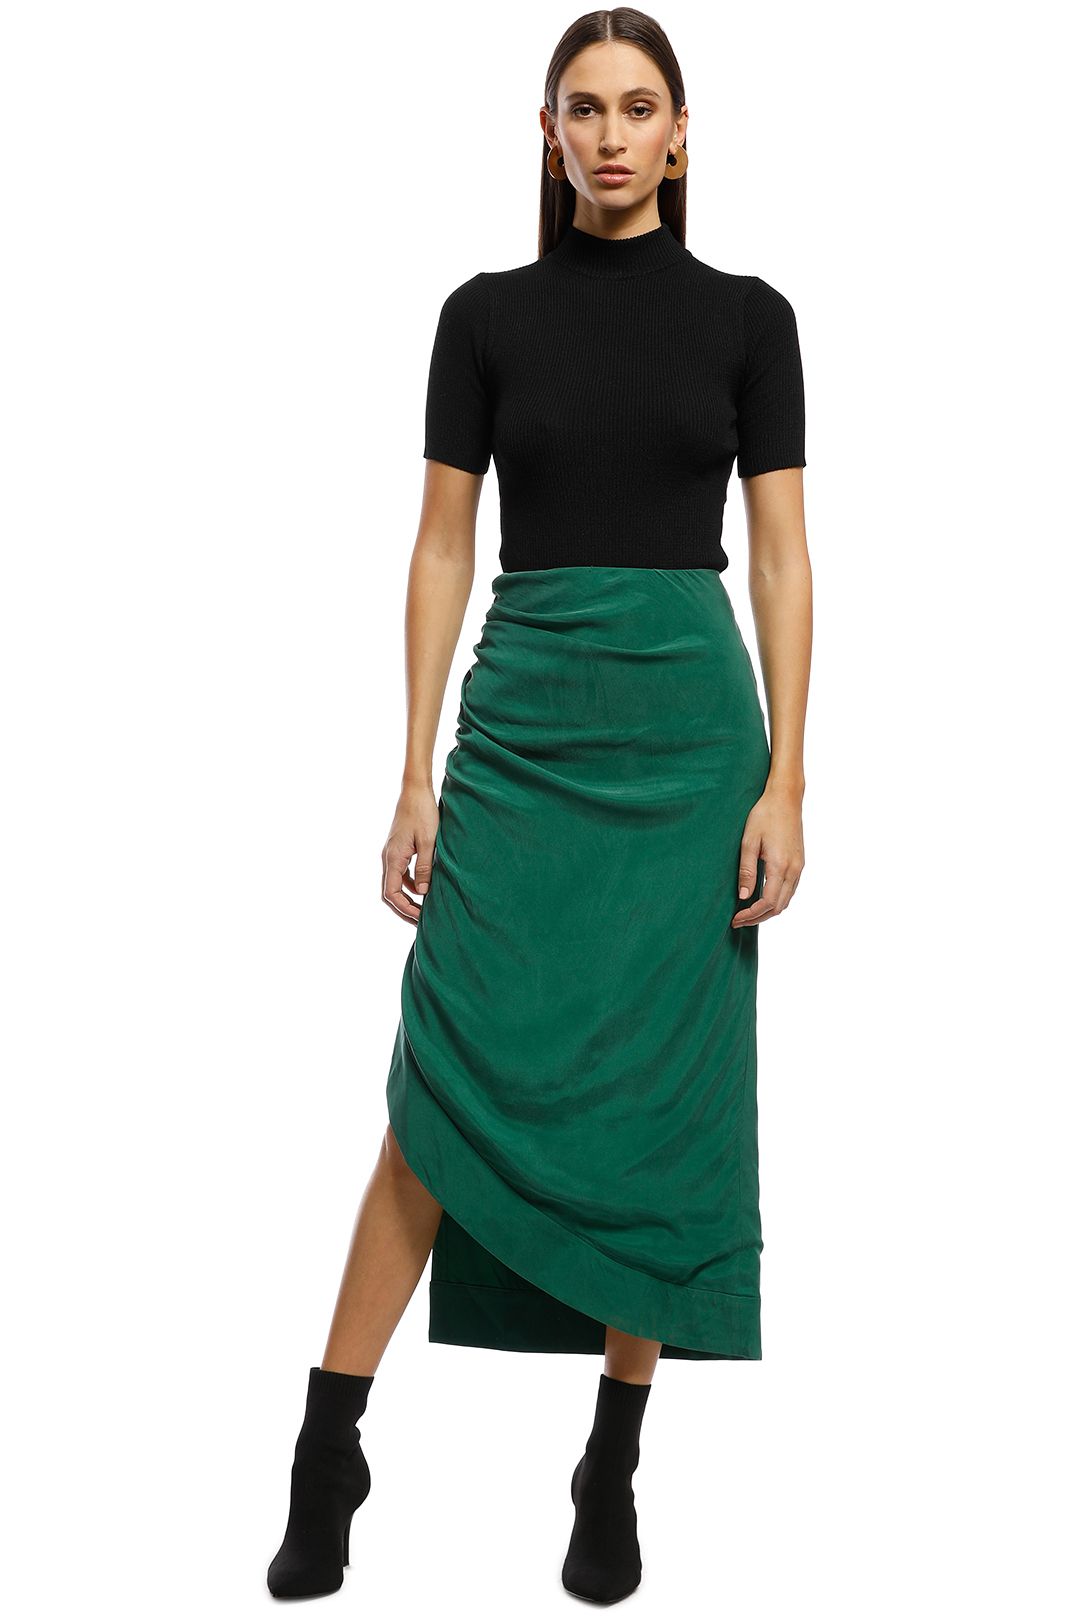 CMEO Collective - Ended Up Here Skirt - Green - Front